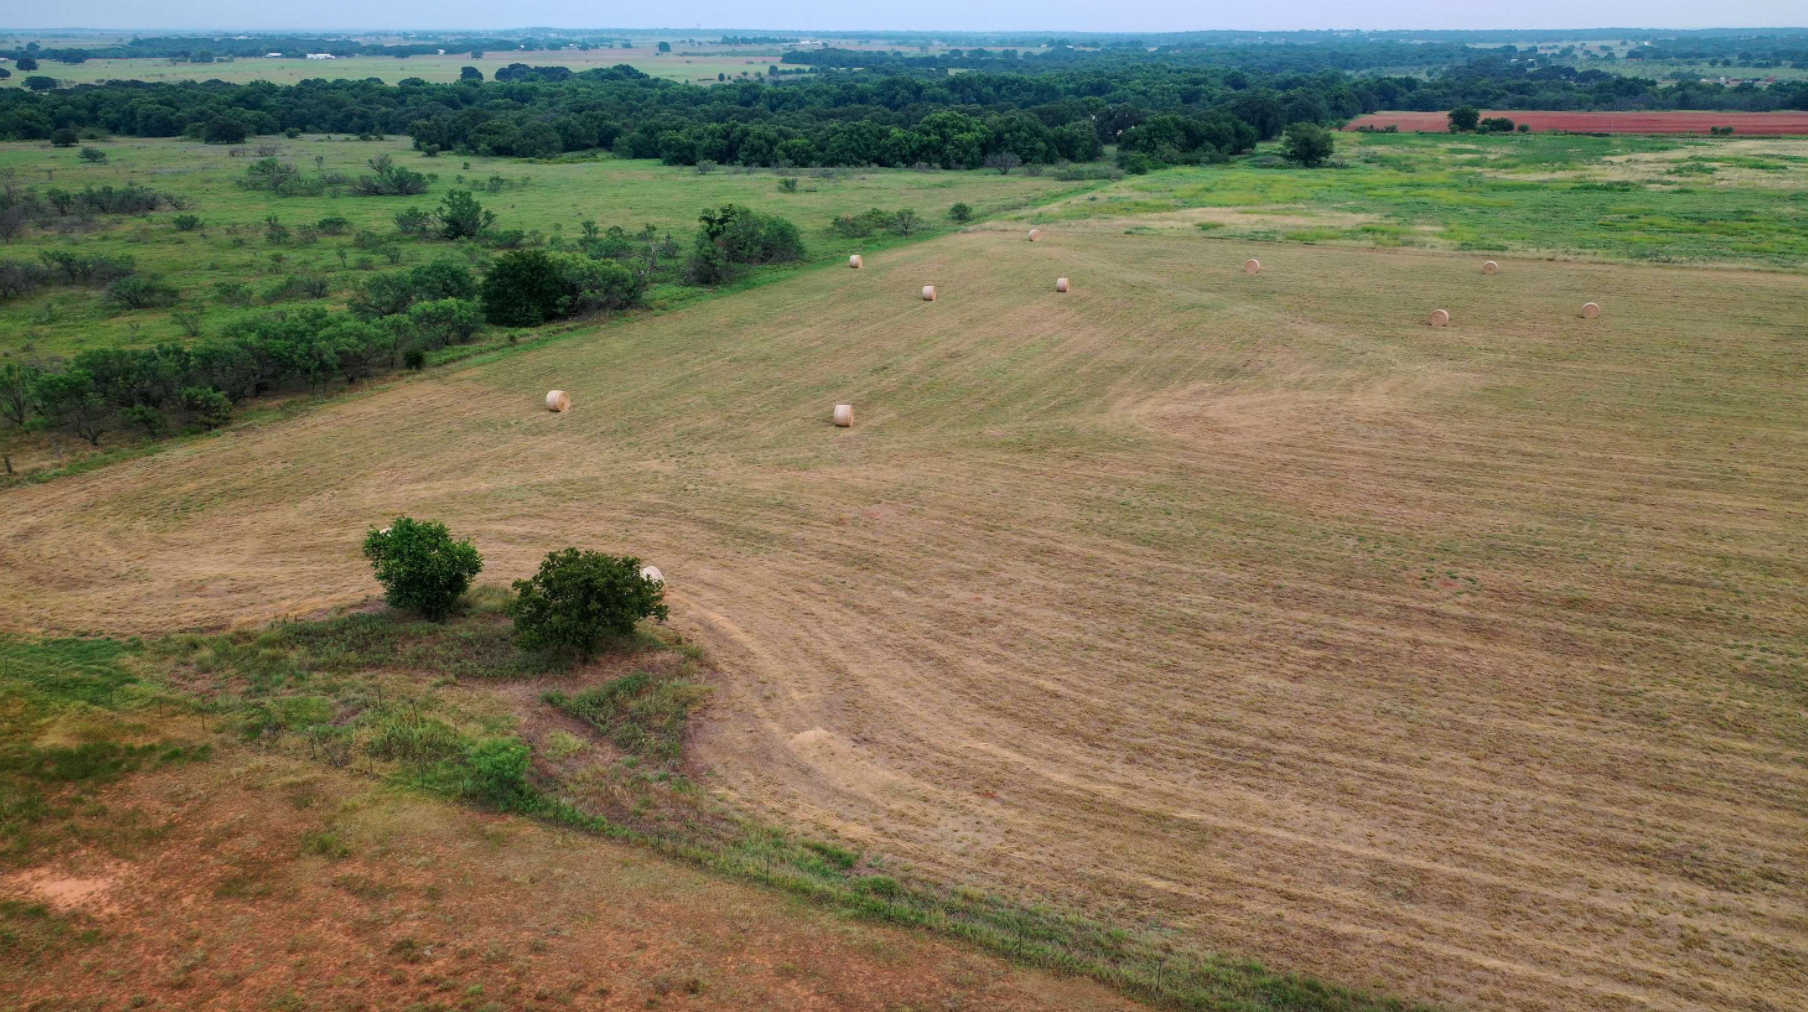 red-river-realty-gary-eldred-montague-county-nocona-texas-acres-development-new-home-builds-tract-landScreen Shot 2021-09-22 at 2.37.22 PM.png